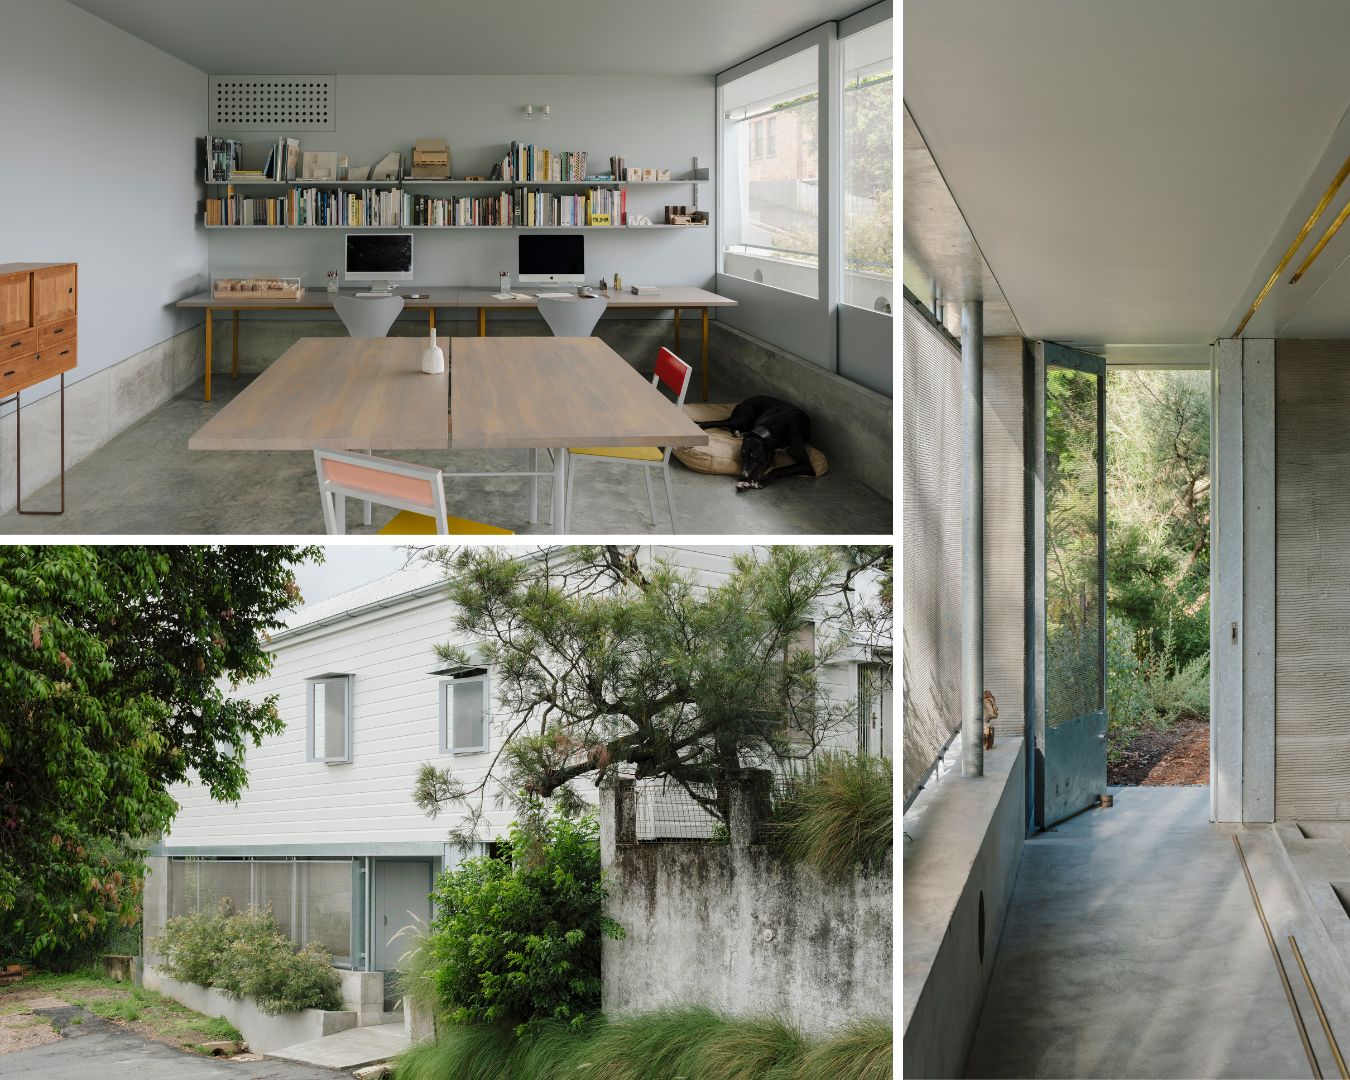 A collage shows a sleek architecture studio and a street view of the property.